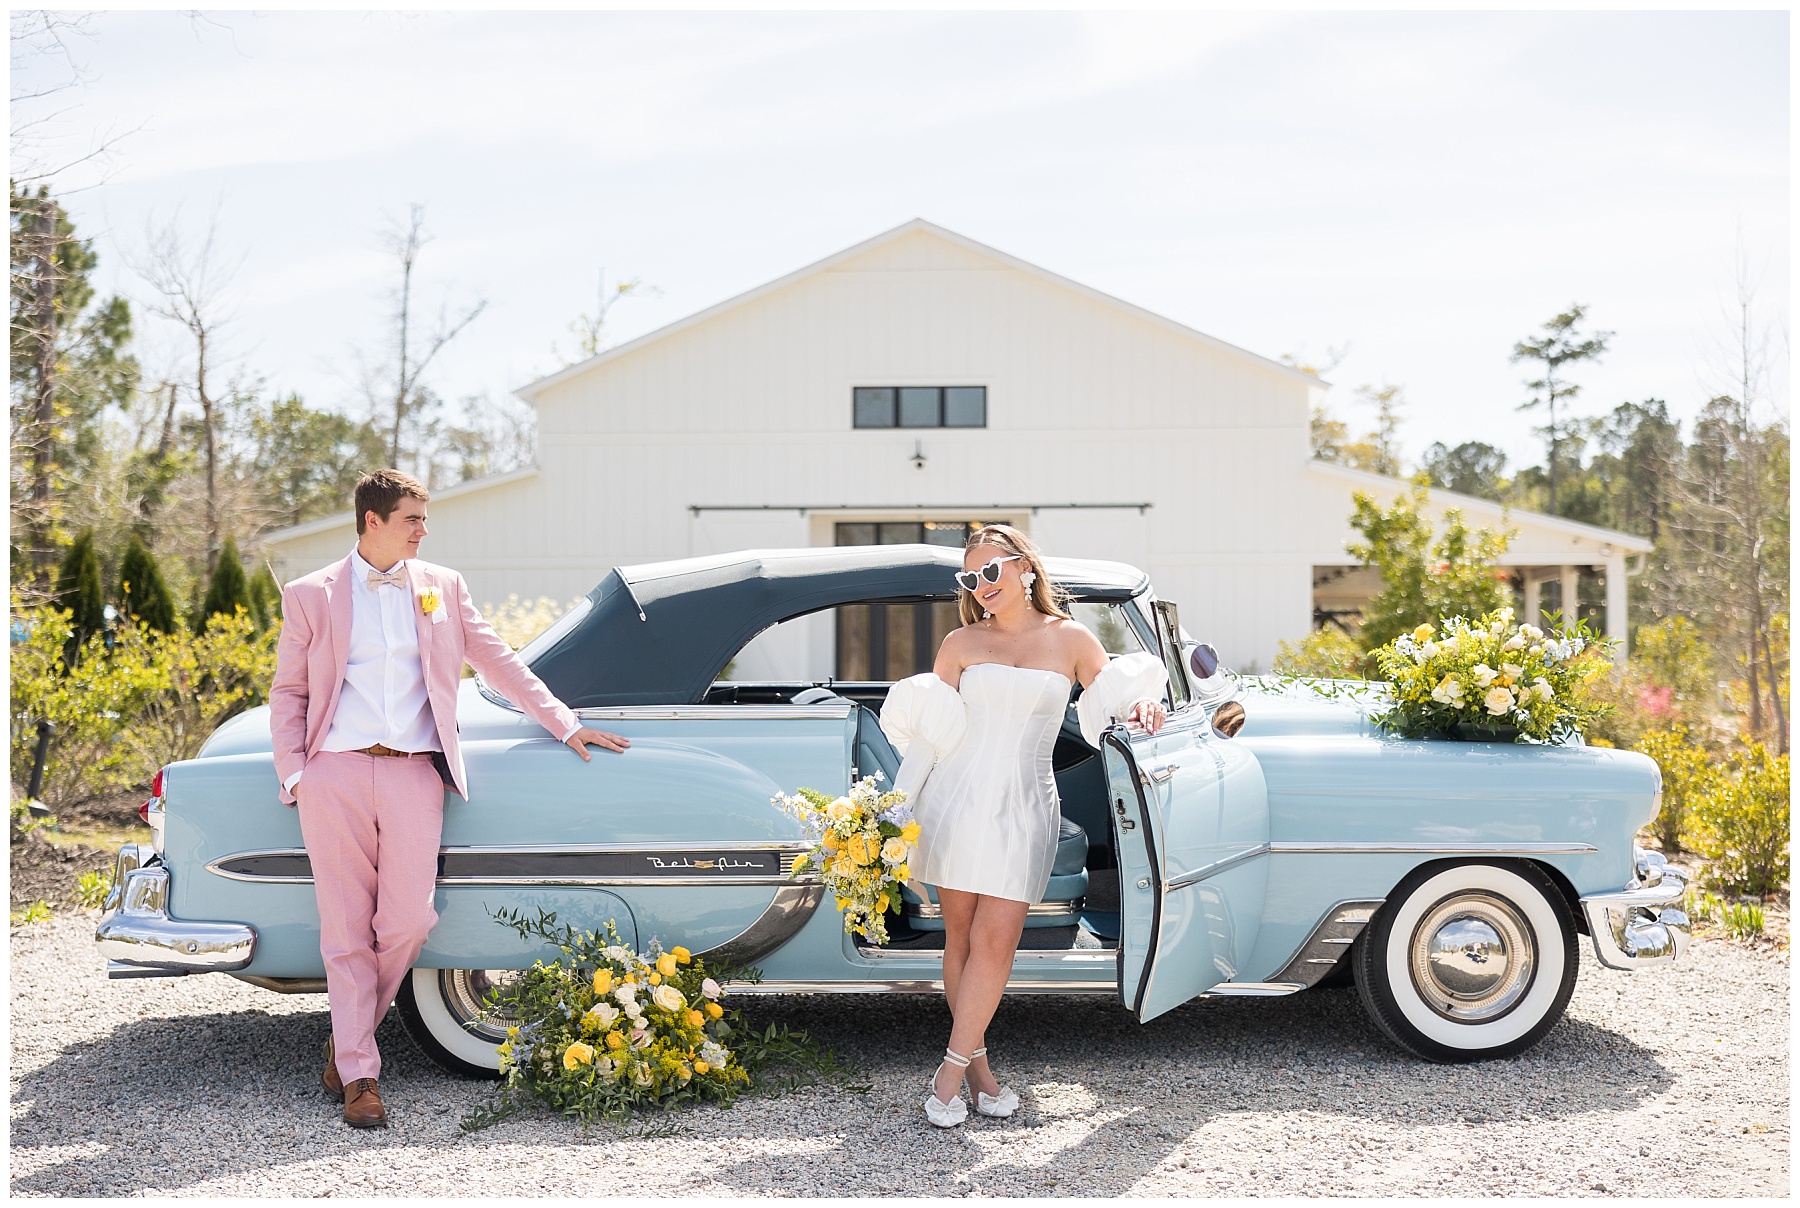 A colorful pastel wedding at White Oaks Farm in Myrtle Beach | SC Wedding Photographer